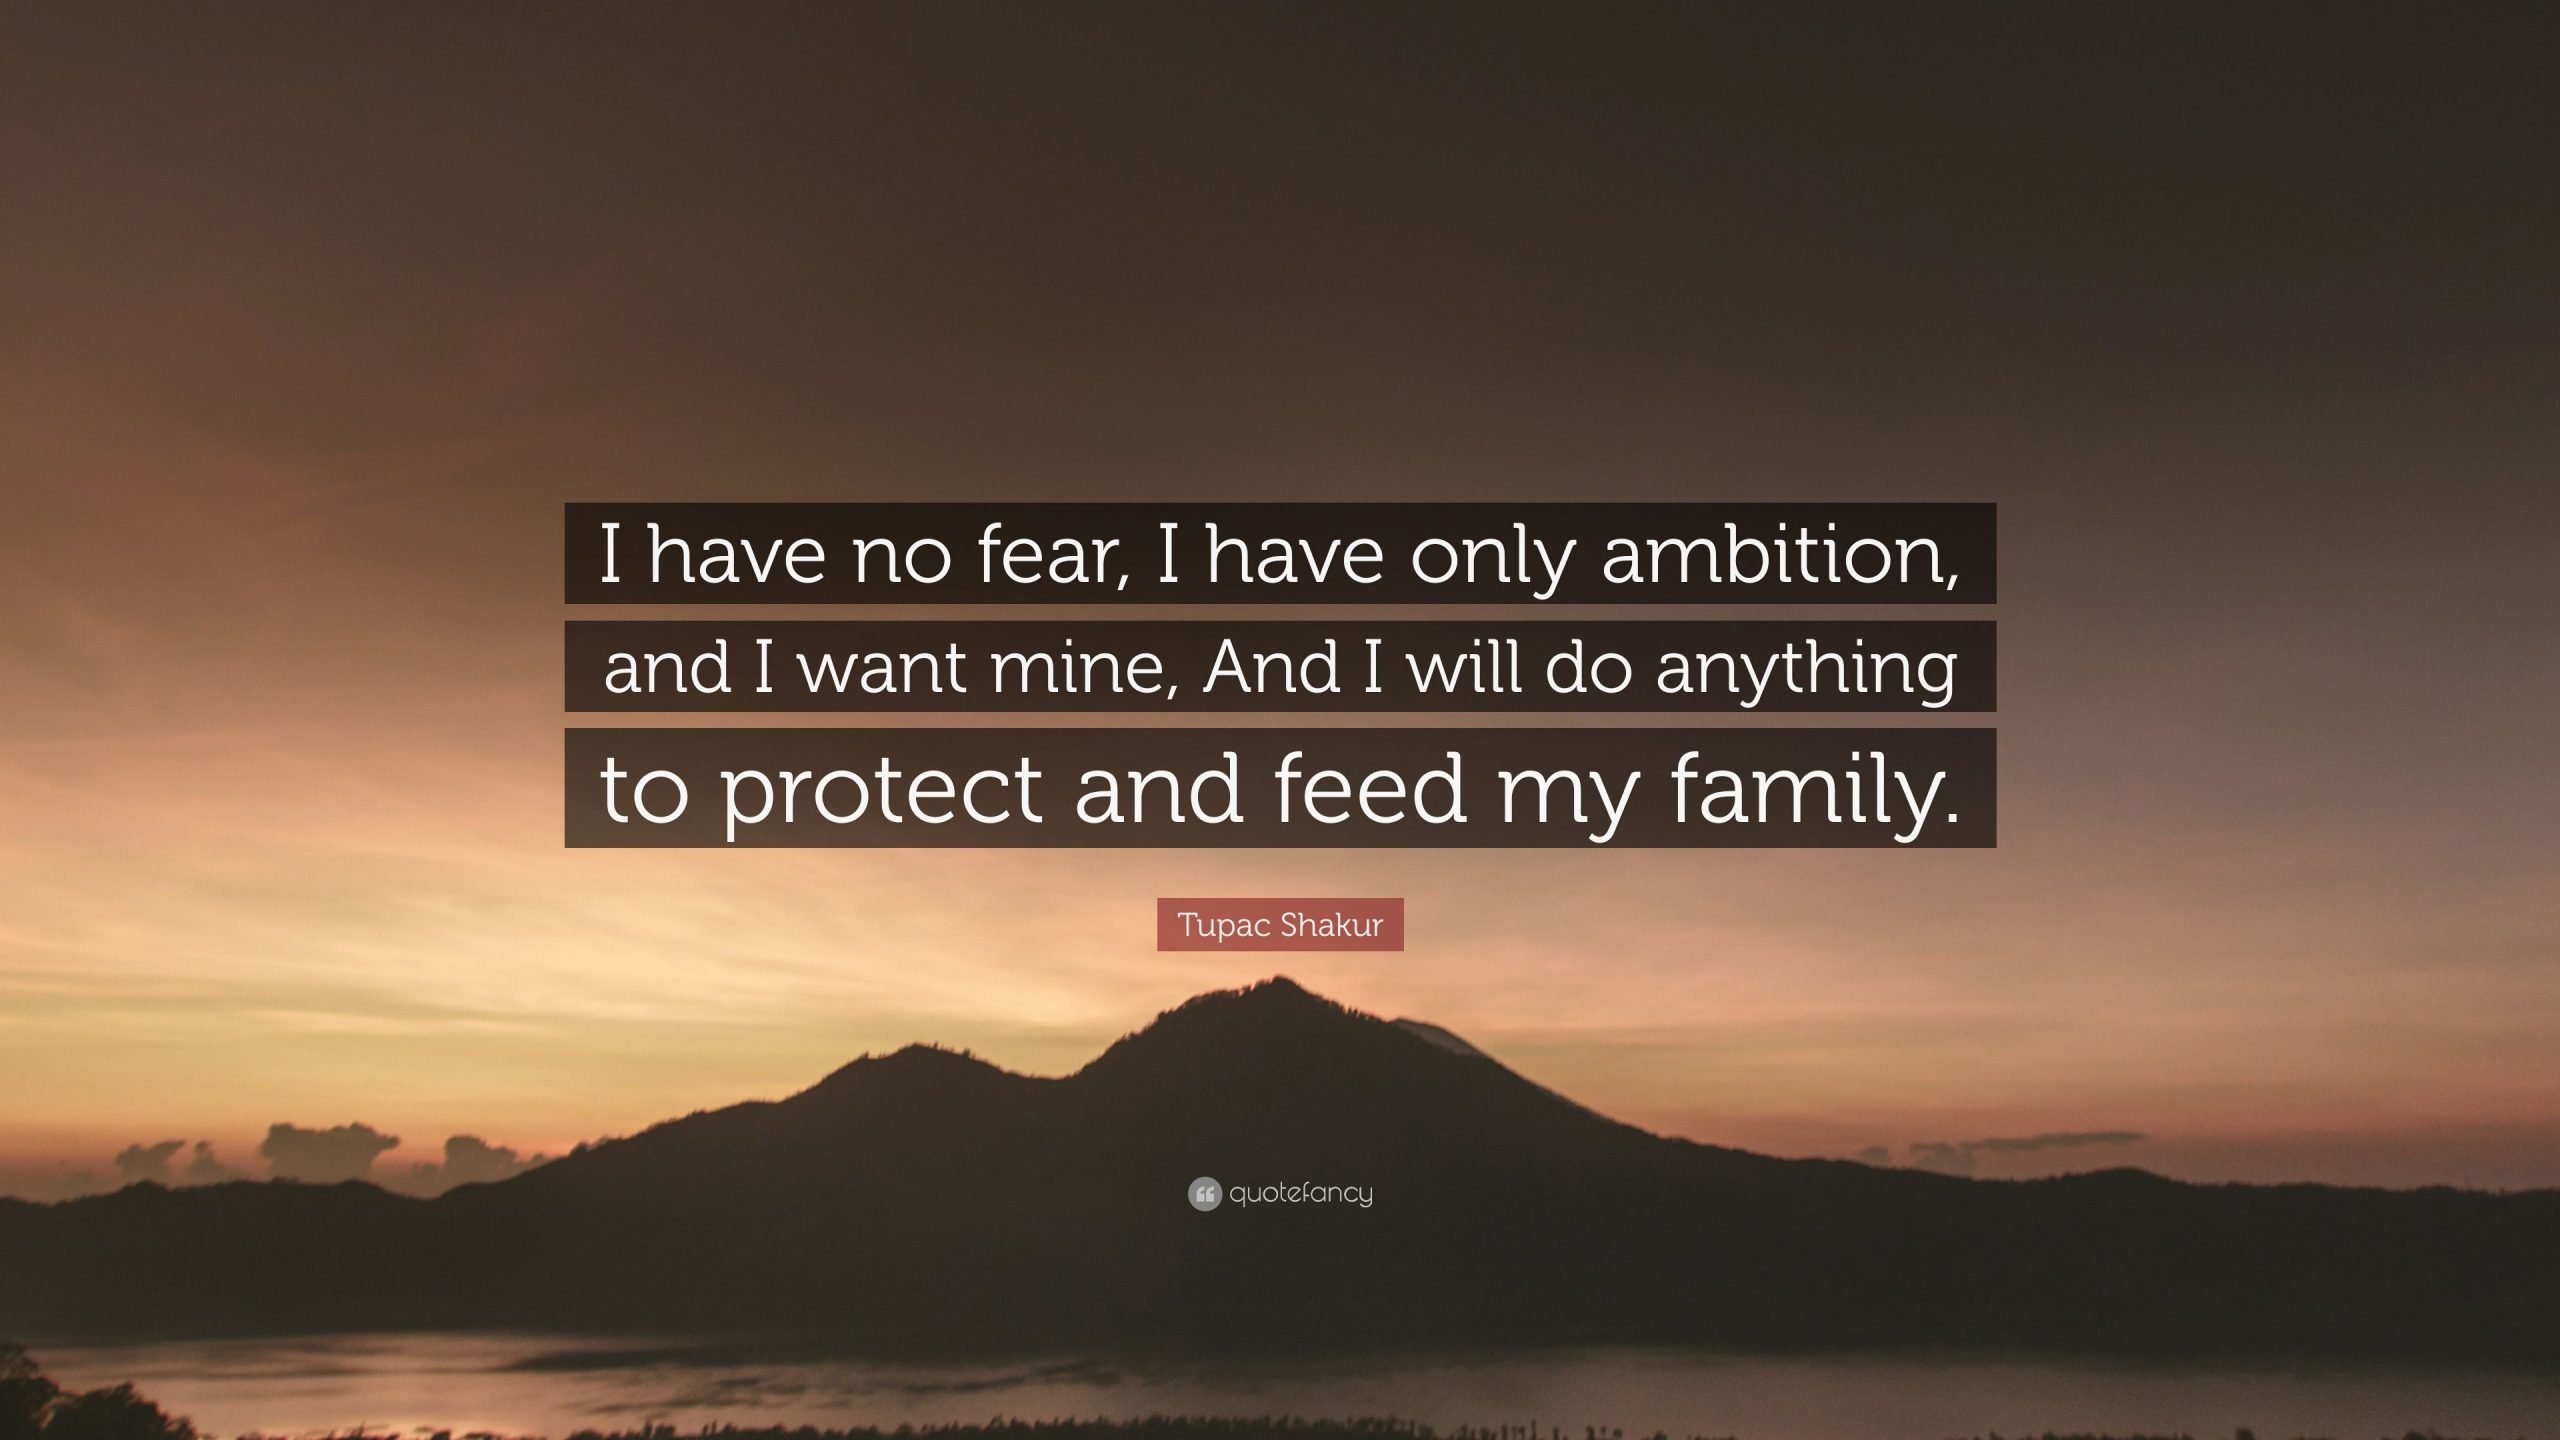 Tupac Shakur Quote: I have no fear, I have only ambition ...